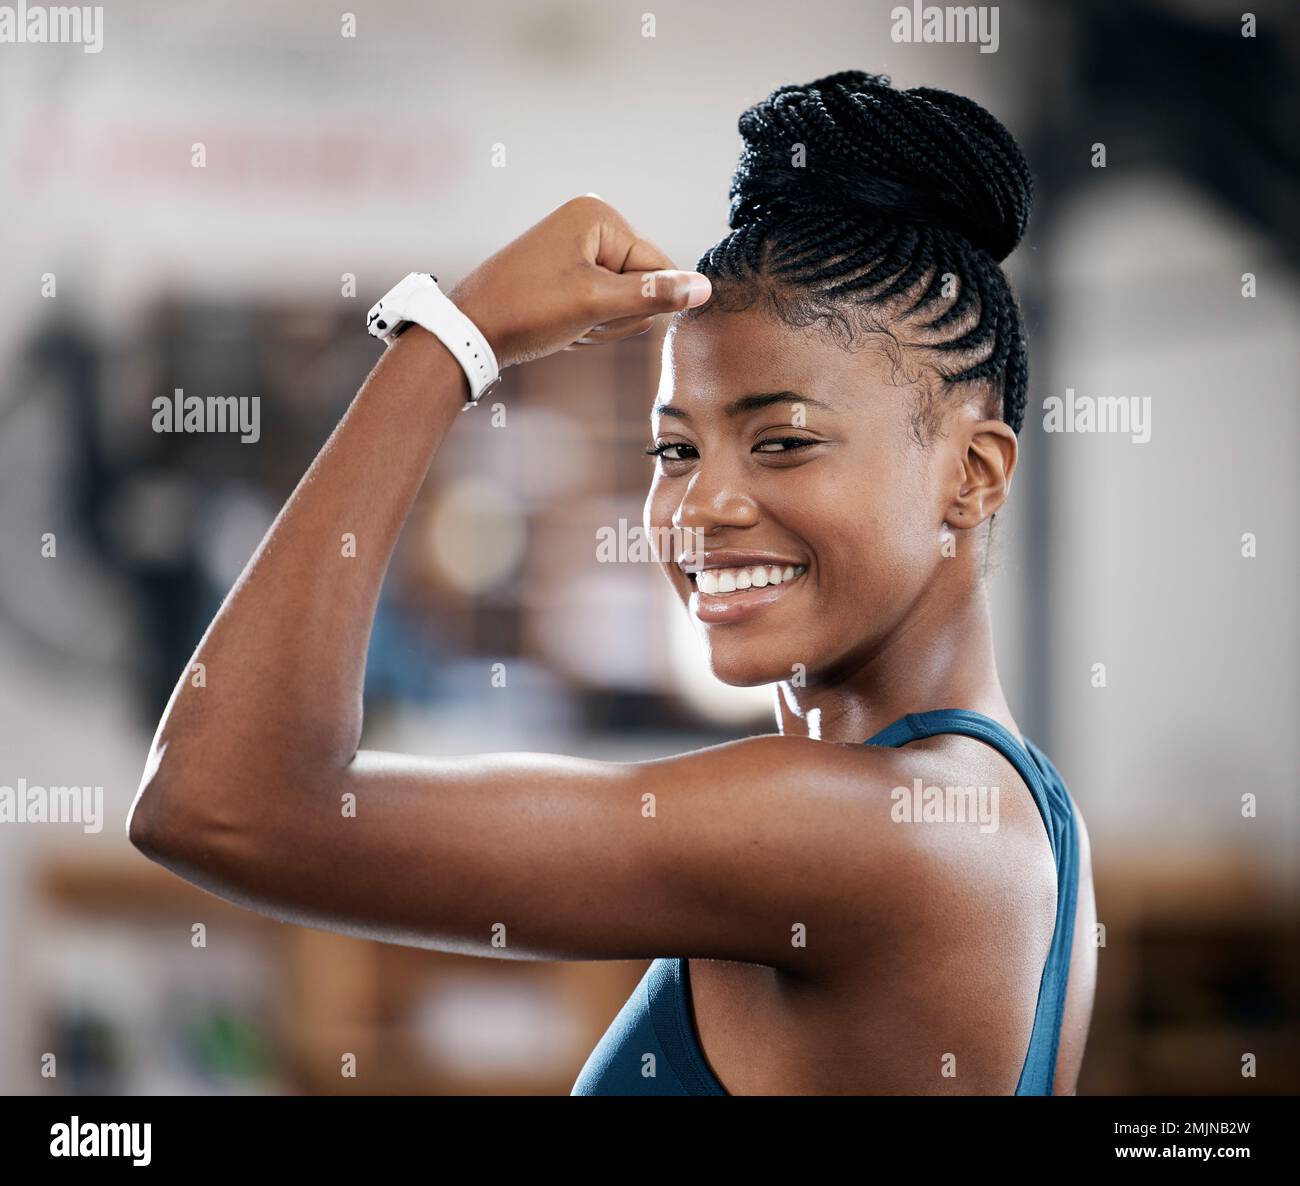 Portrait, fitness or black woman flexing muscle or body goals in training, workout or exercise at gym. Strong person, results or healthy African girl Stock Photo